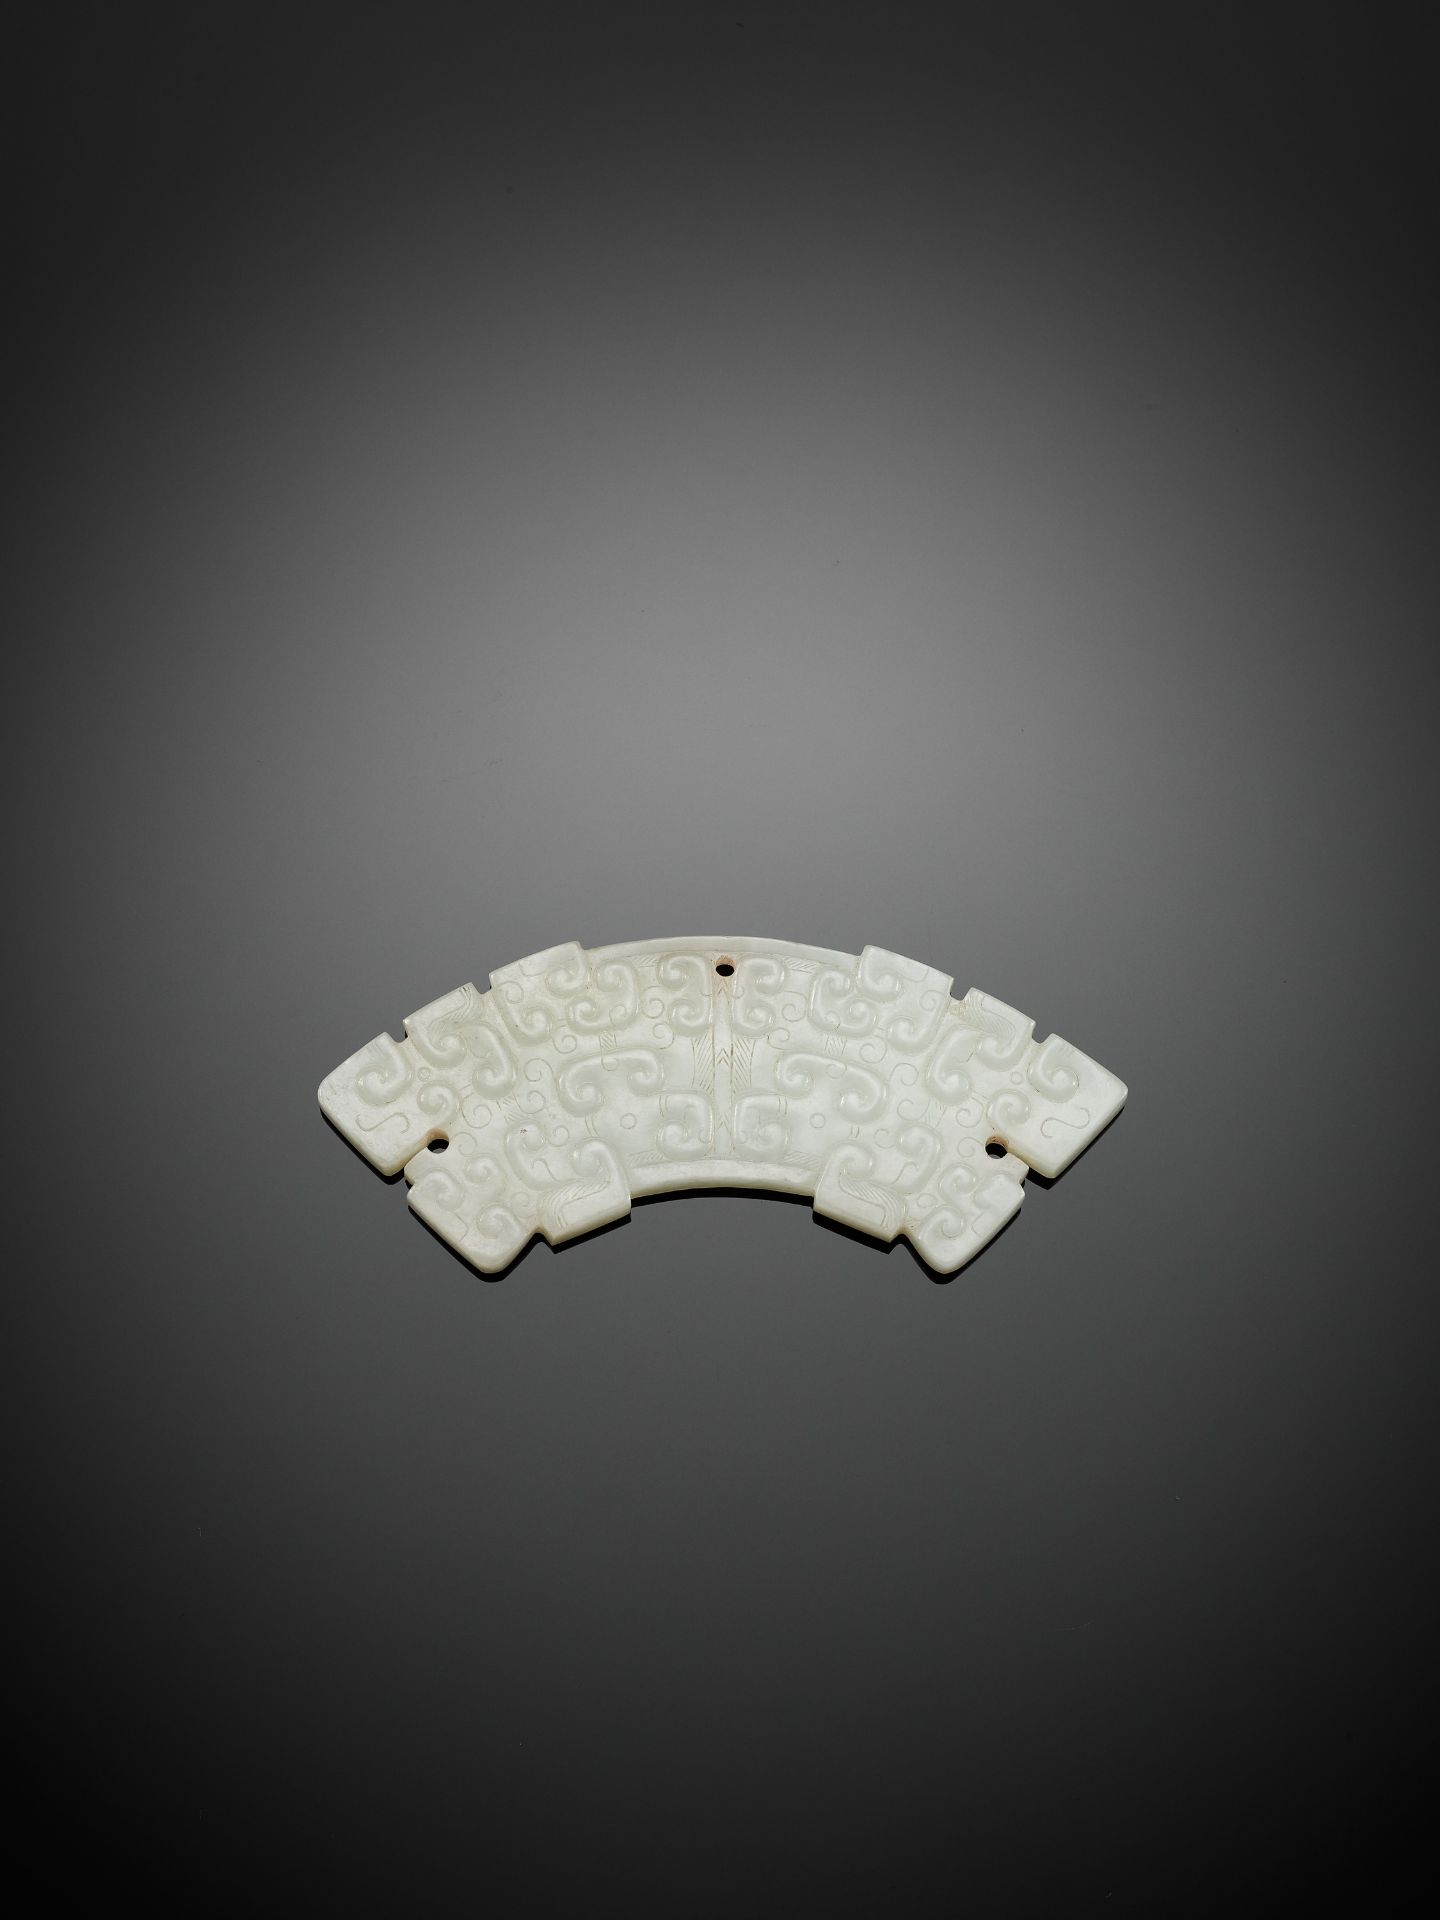 A WHITE JADE PENDANT, HUANG, EASTERN ZHOU DYNASTY - Image 2 of 8